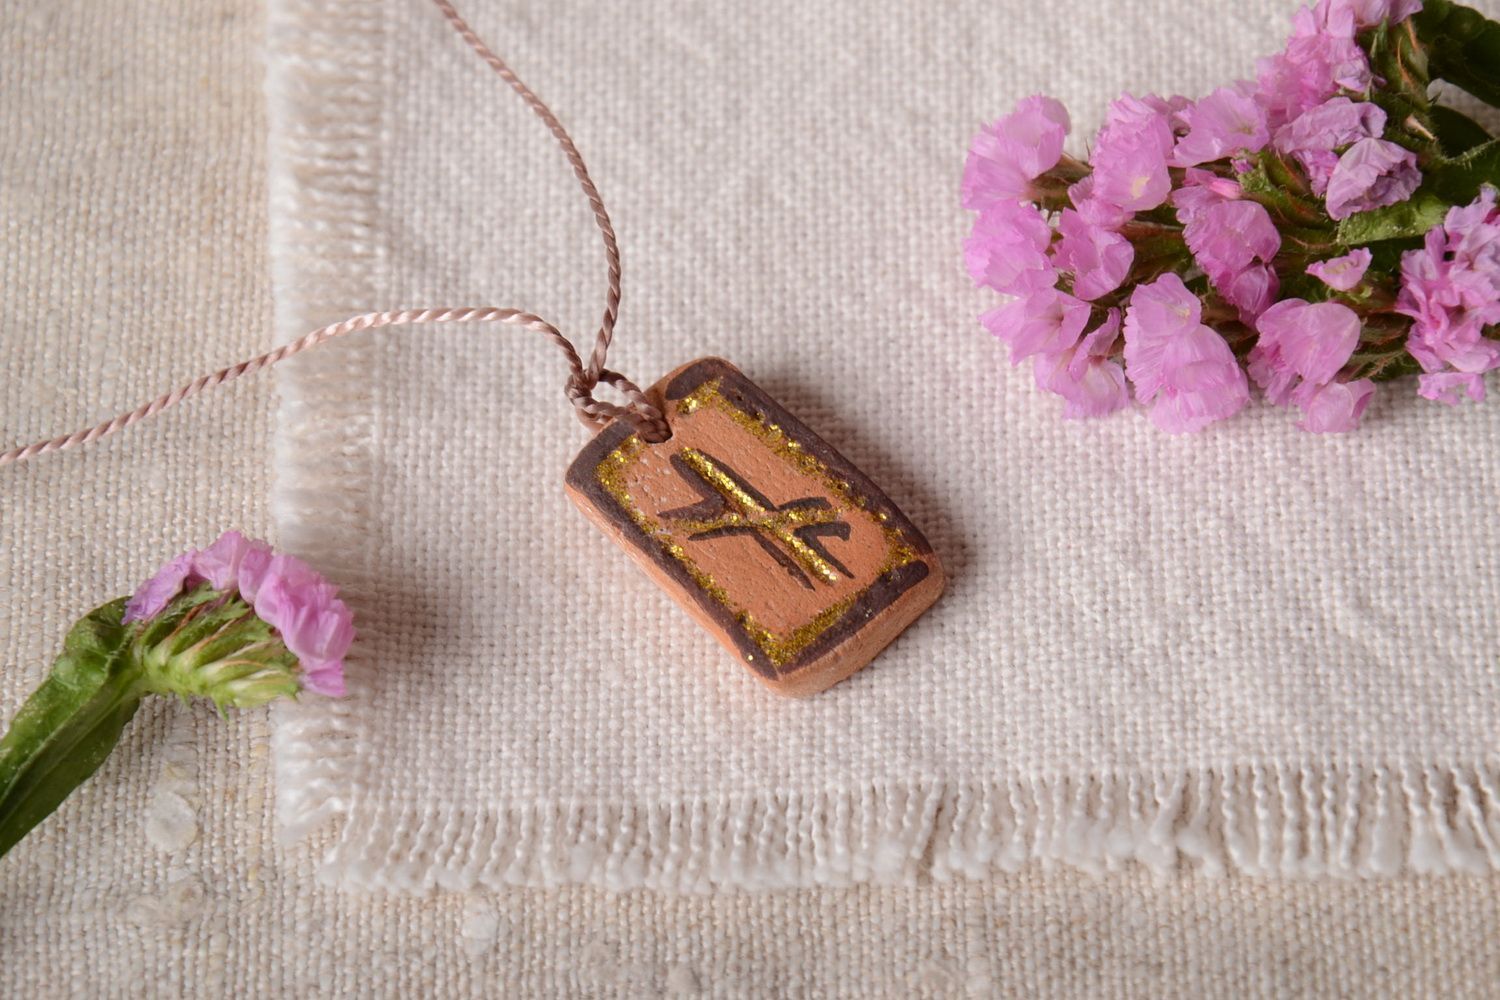 Handmade ceramic jewelry pendant necklace rune meaning necklace designs photo 1